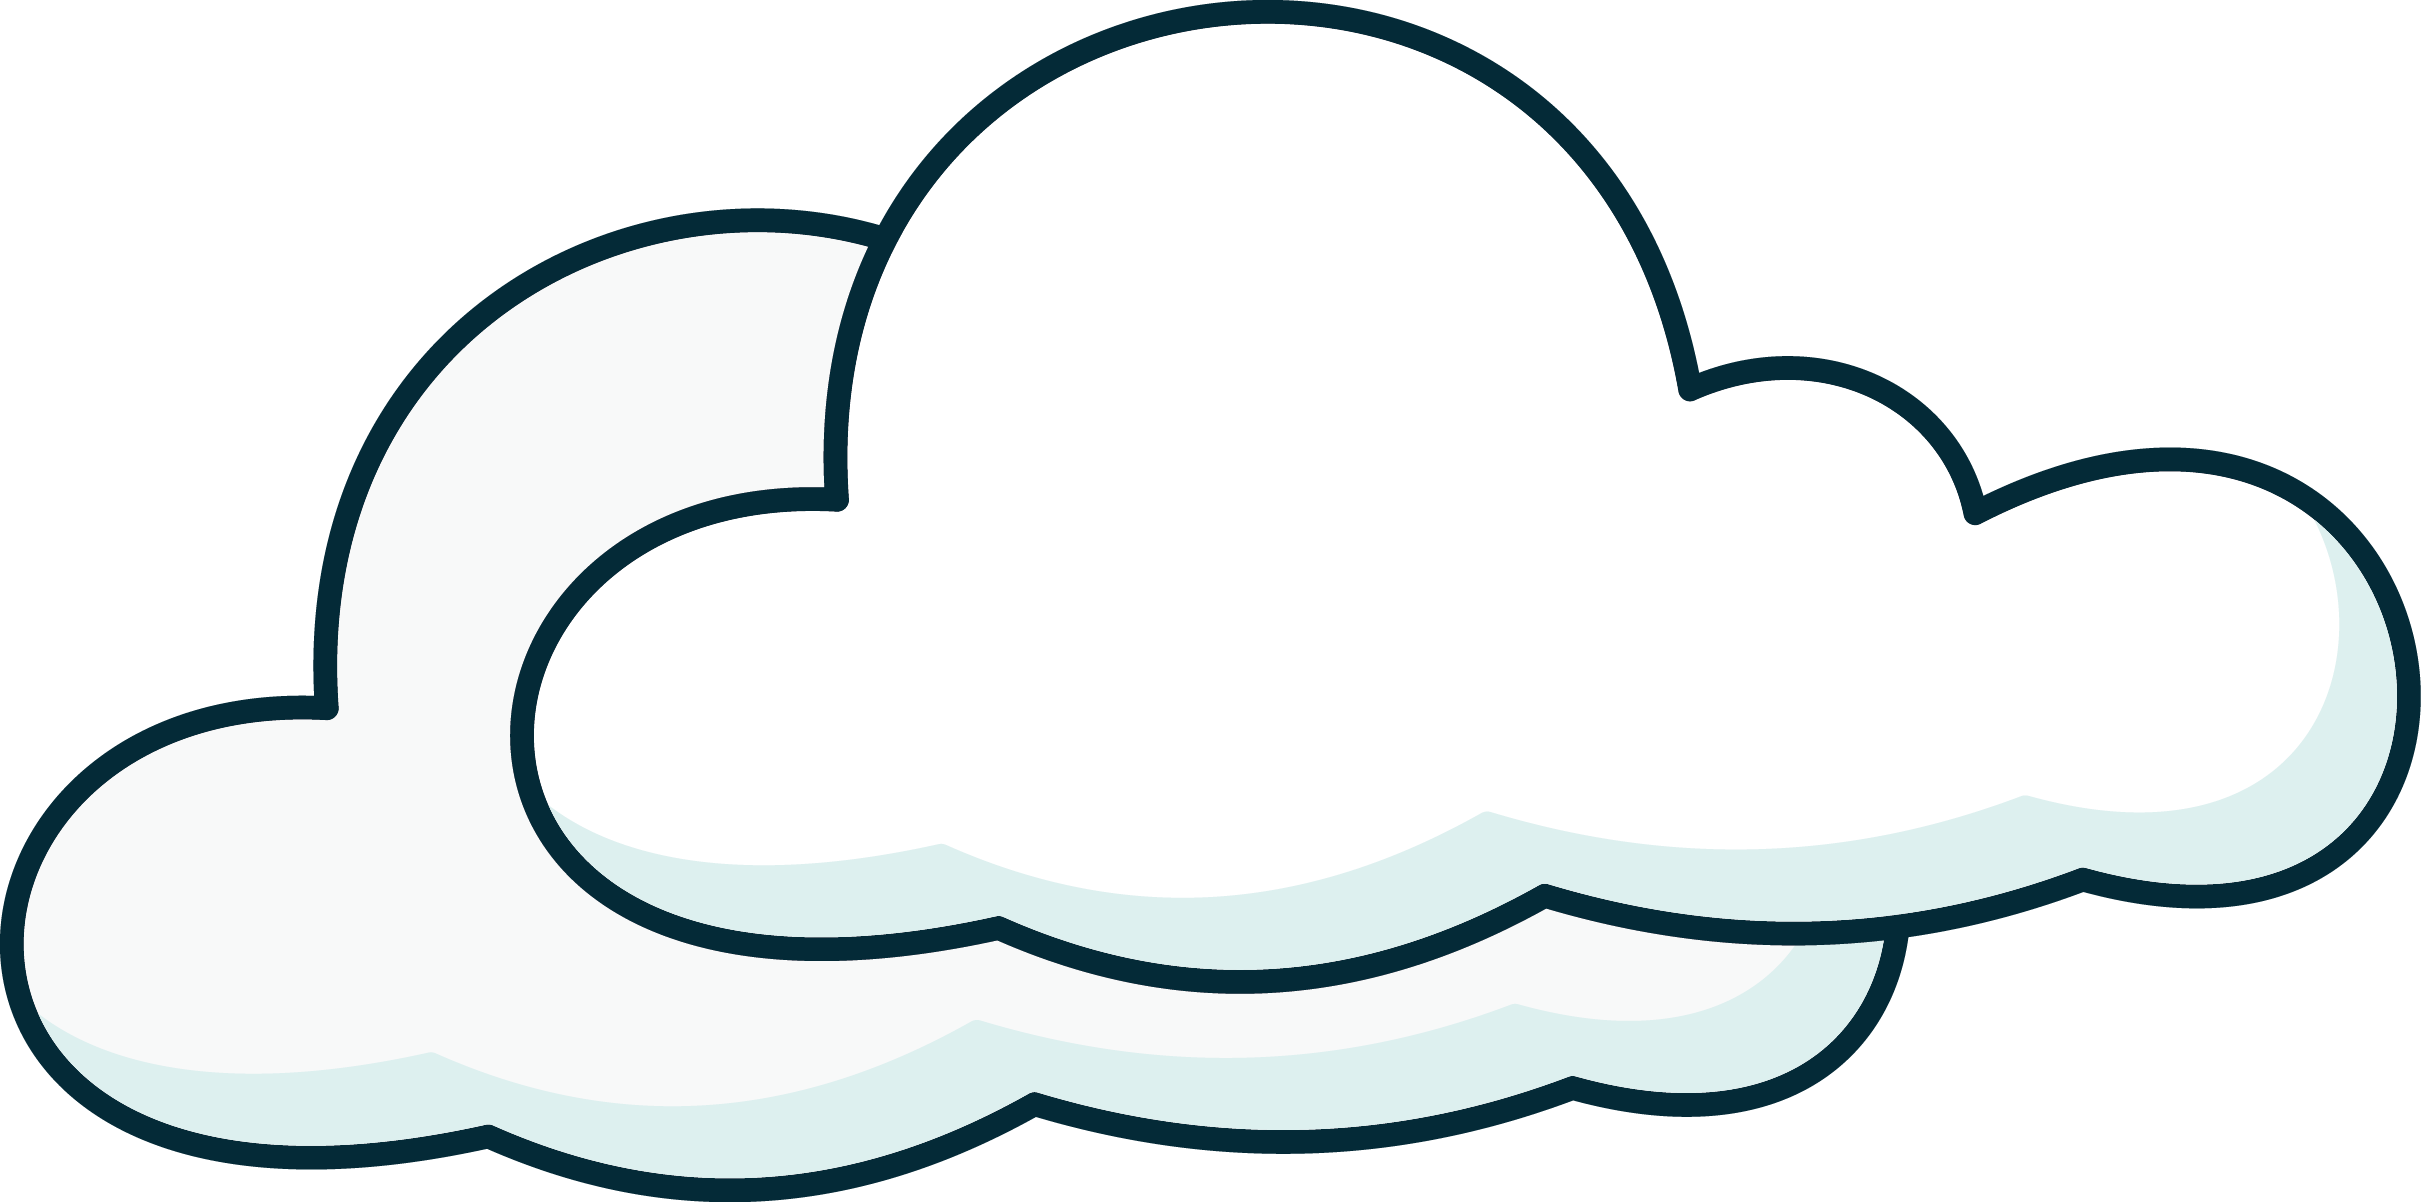 Nubes Caricatura Png Artwork Images Clip Art Art Images | Images and ...